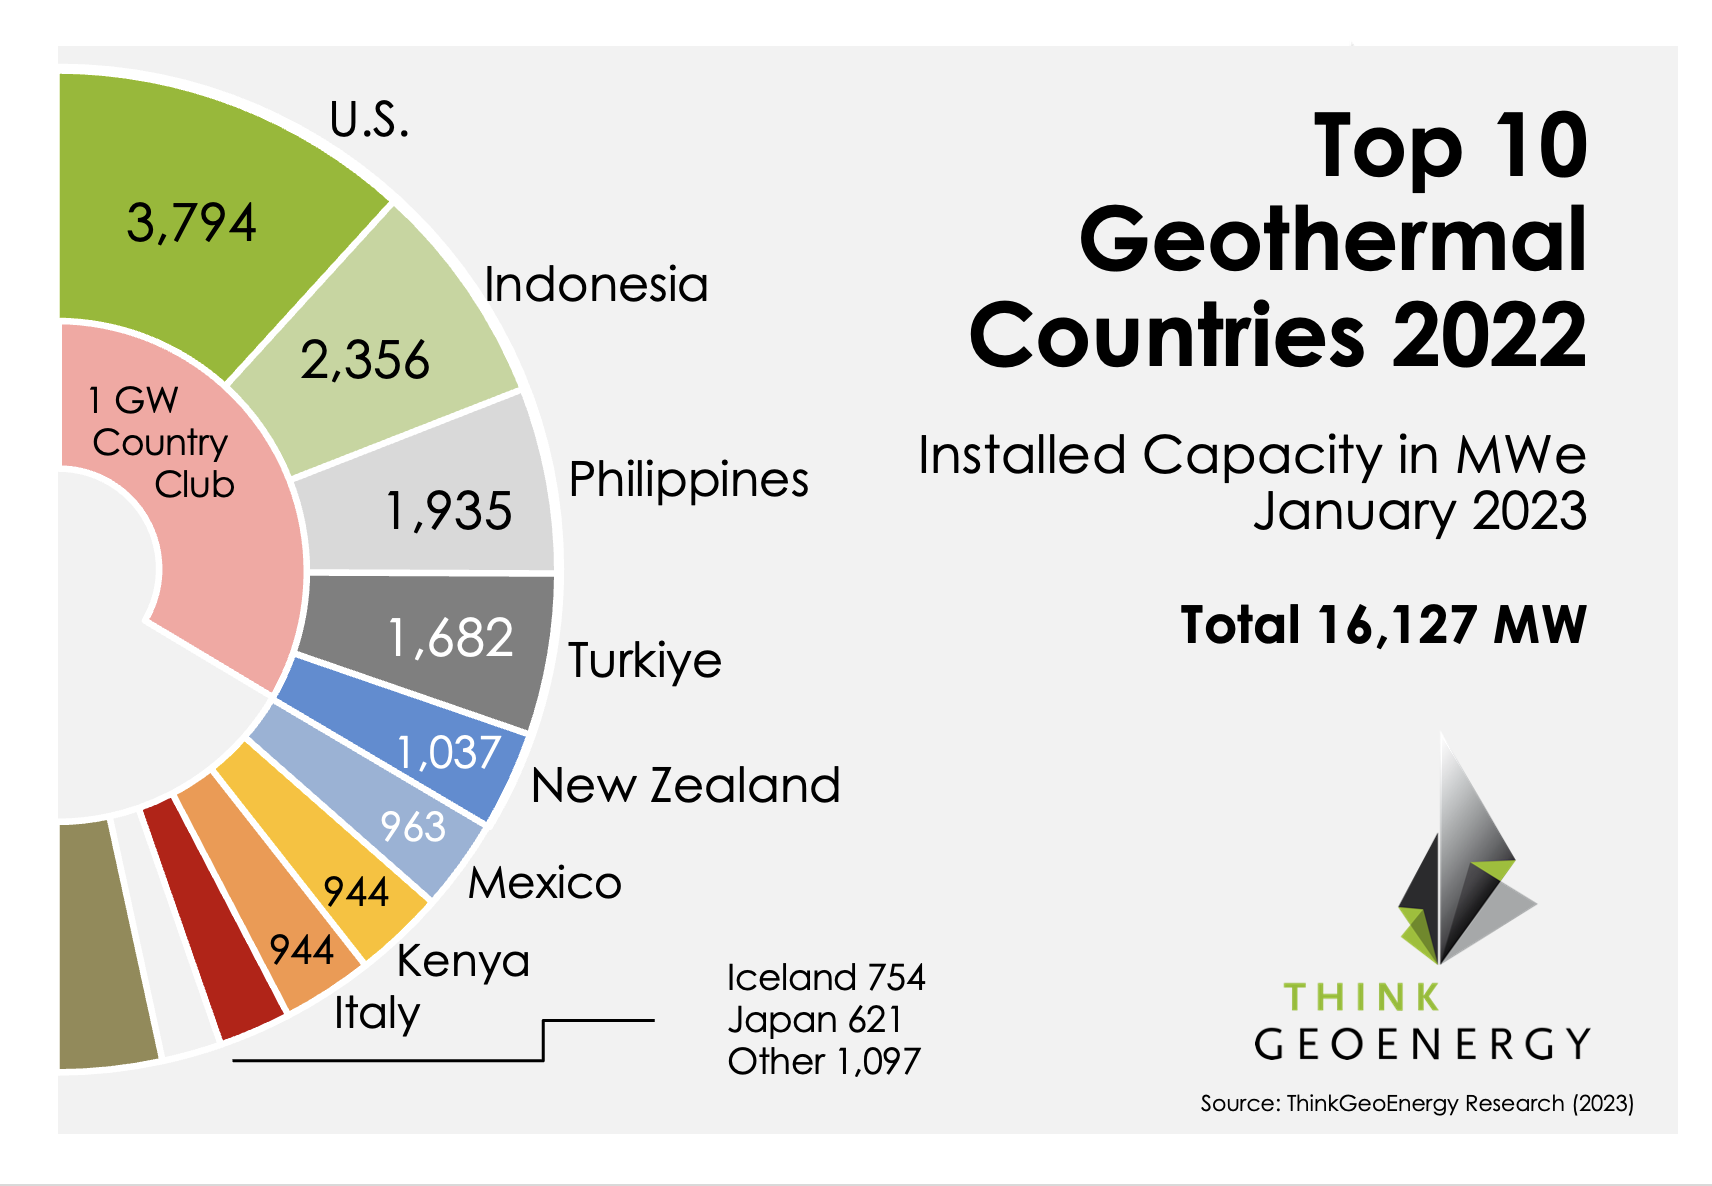 https://www.thinkgeoenergy.com/wp-content/uploads/2023/01/tge_geothermal_top10_2022.png